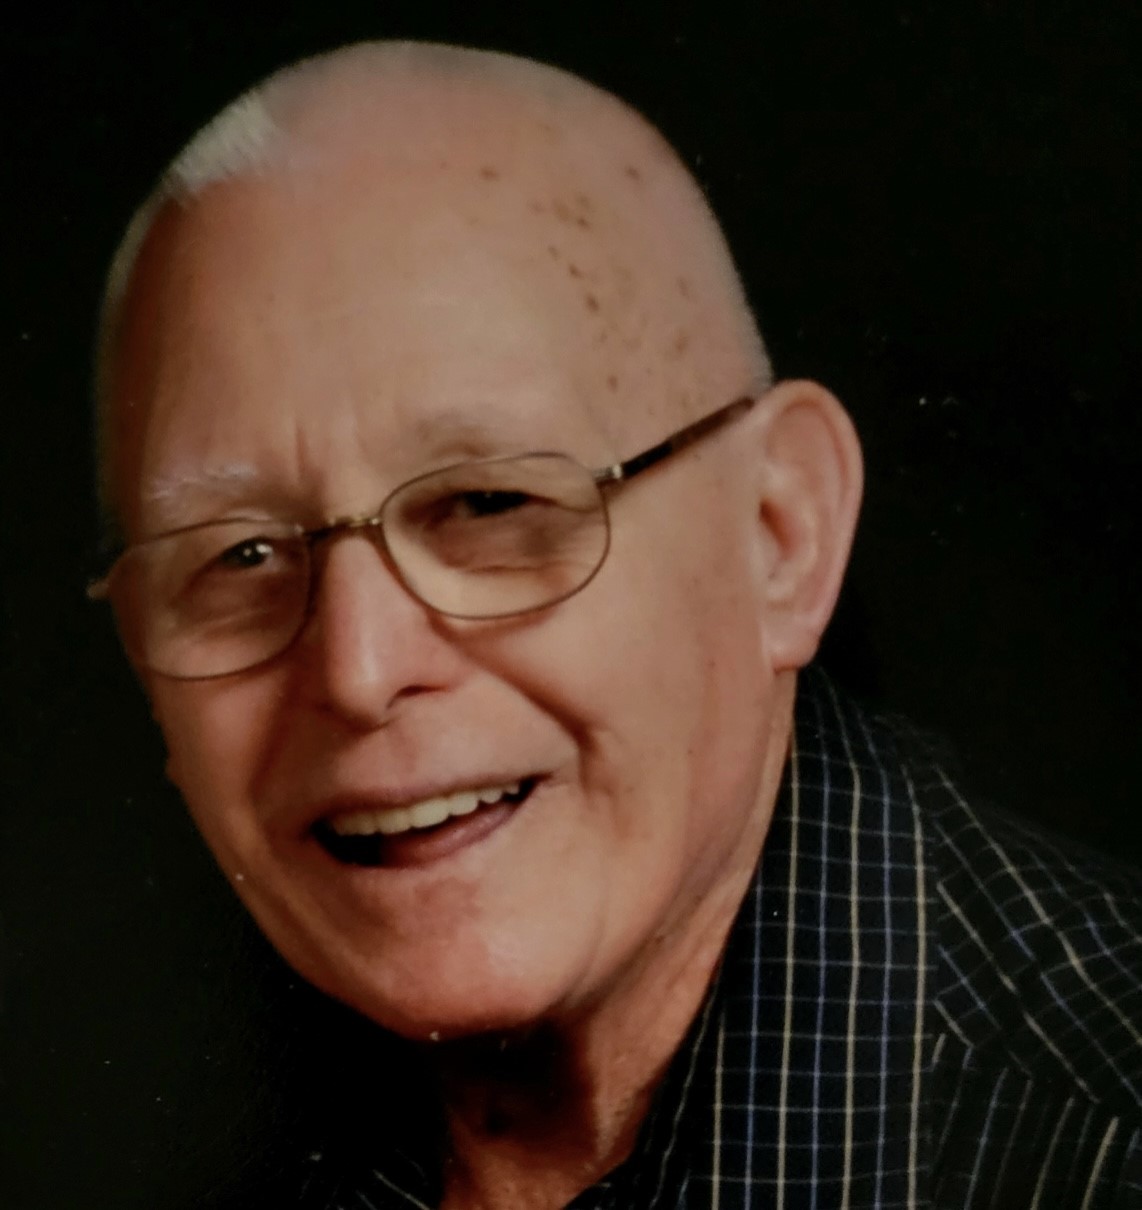 Obituary for Danny Posey